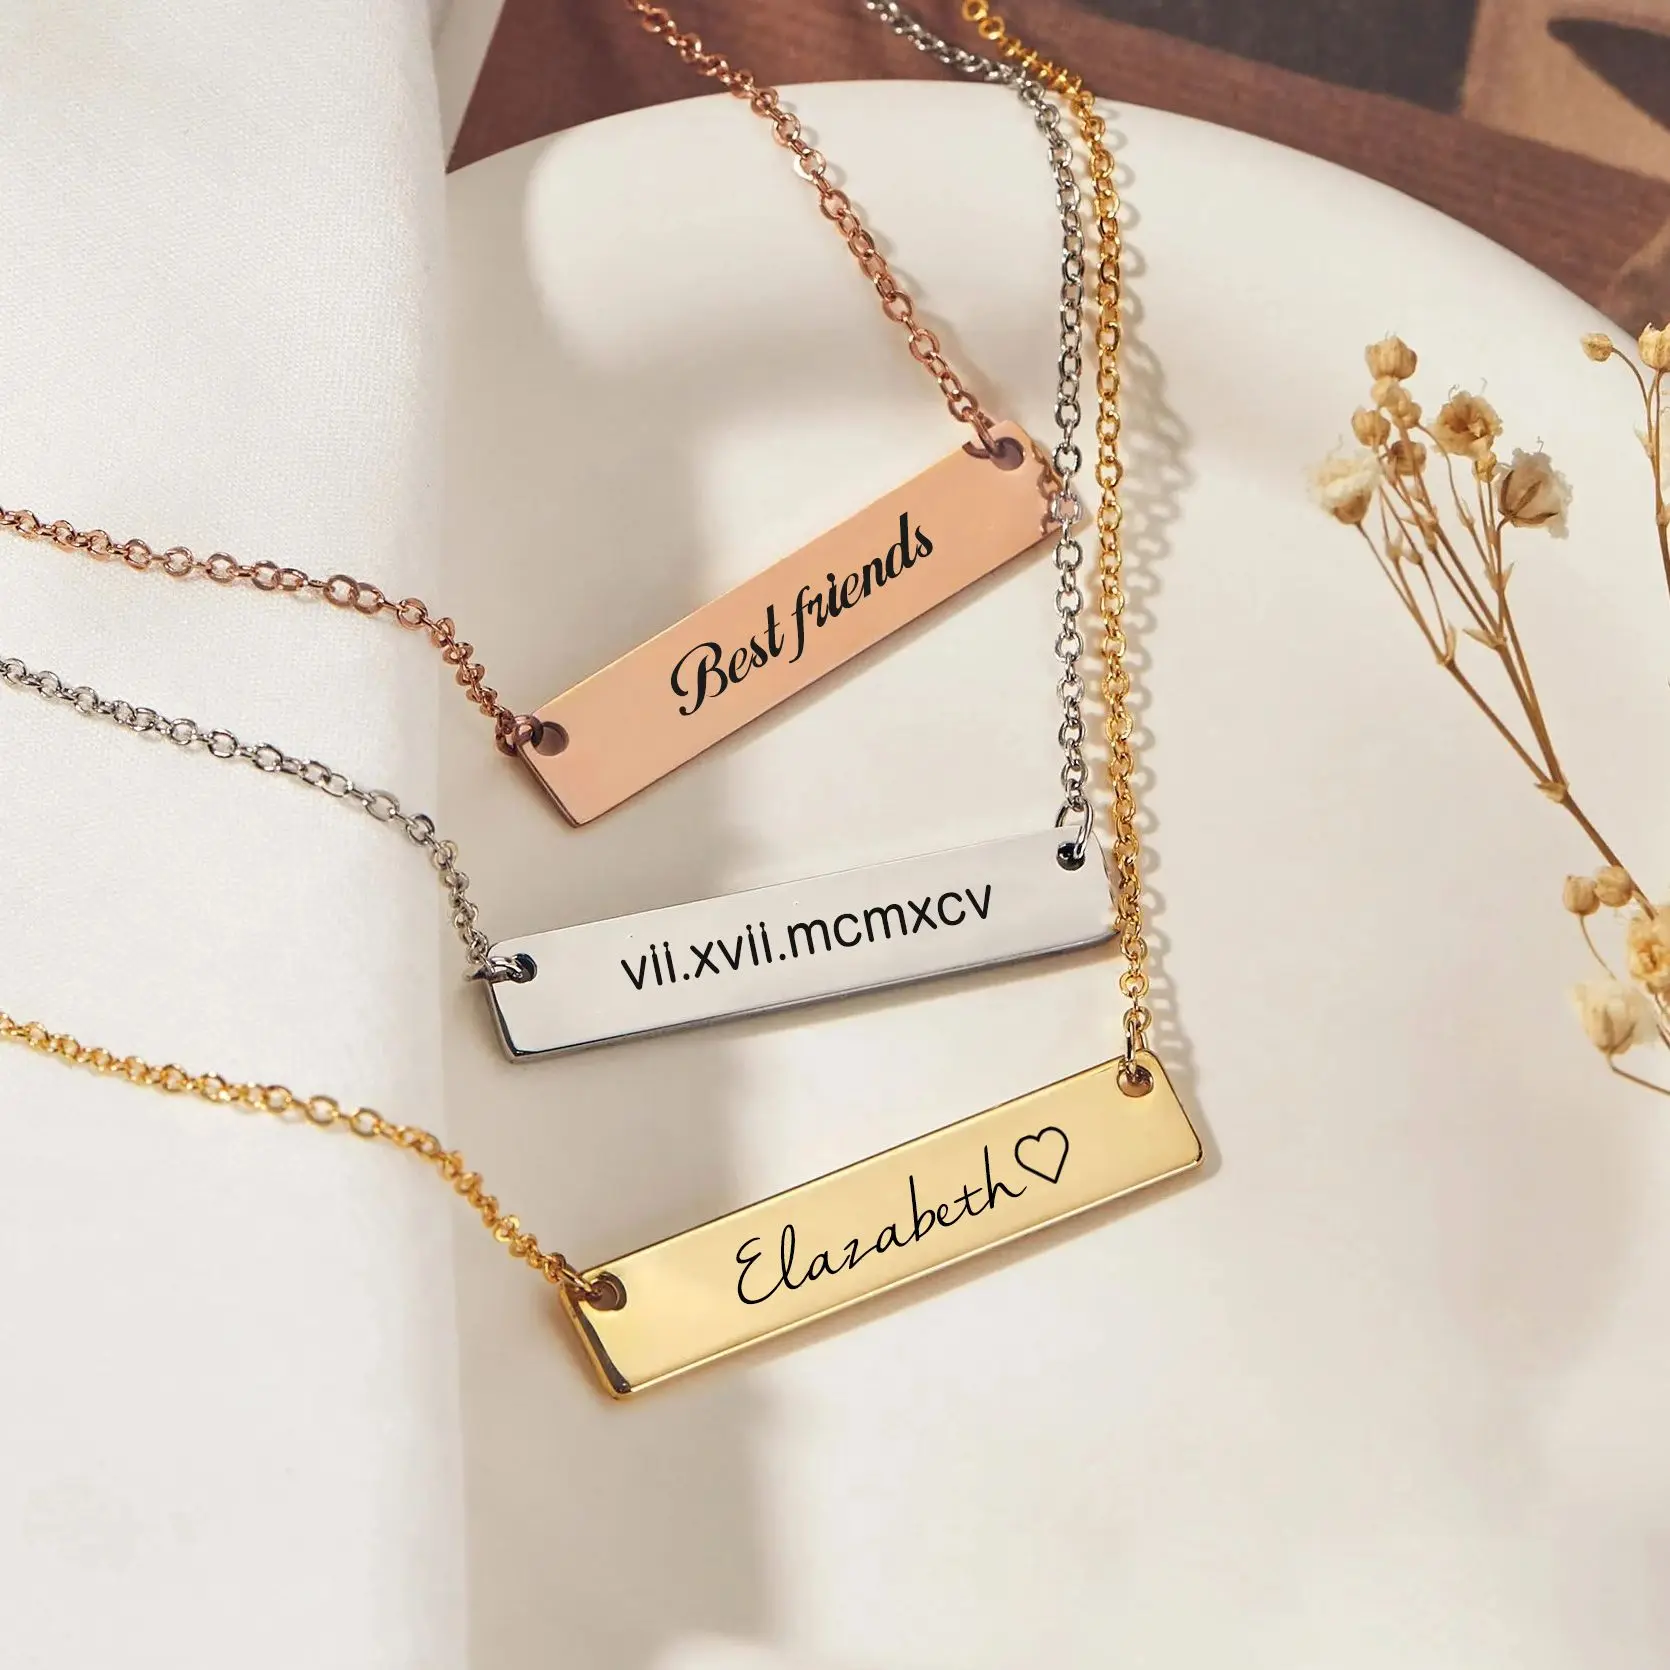 Daily Engraved Name Bar Necklace Custom Text Square Necklace with Rolo Chain Nameplate Jewelry Gift Birthday Gift for Woman logo stylus ballpoint pens custom logo free logo design shipping free 20pcs with your logo text customized on pen body